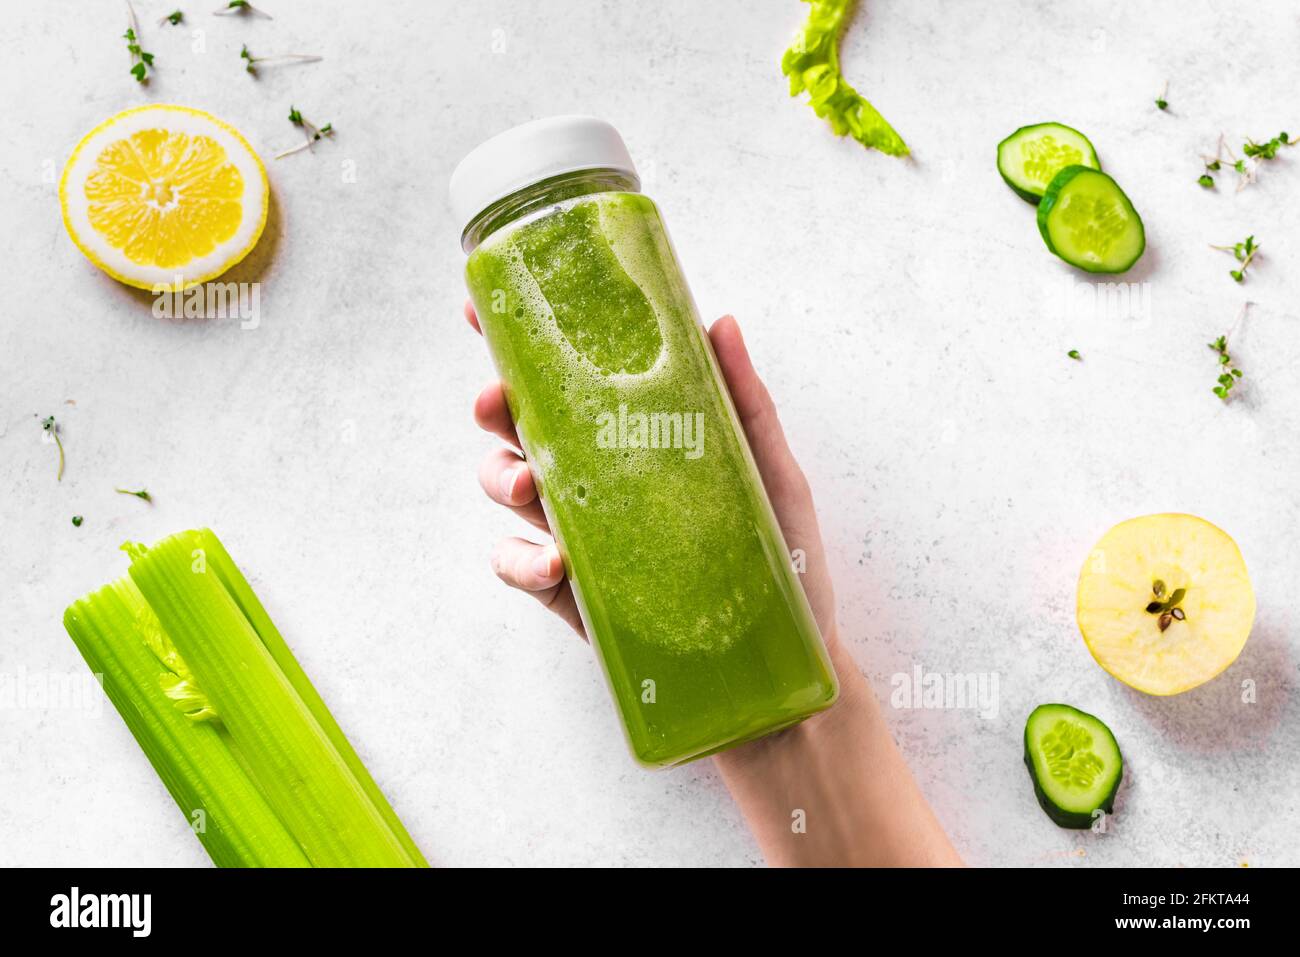 https://c8.alamy.com/comp/2FKTA44/green-smoothie-plastic-bottle-in-female-hand-and-ingredients-on-white-top-view-fresh-raw-detox-smoothie-or-green-juice-for-healthy-eating-2FKTA44.jpg